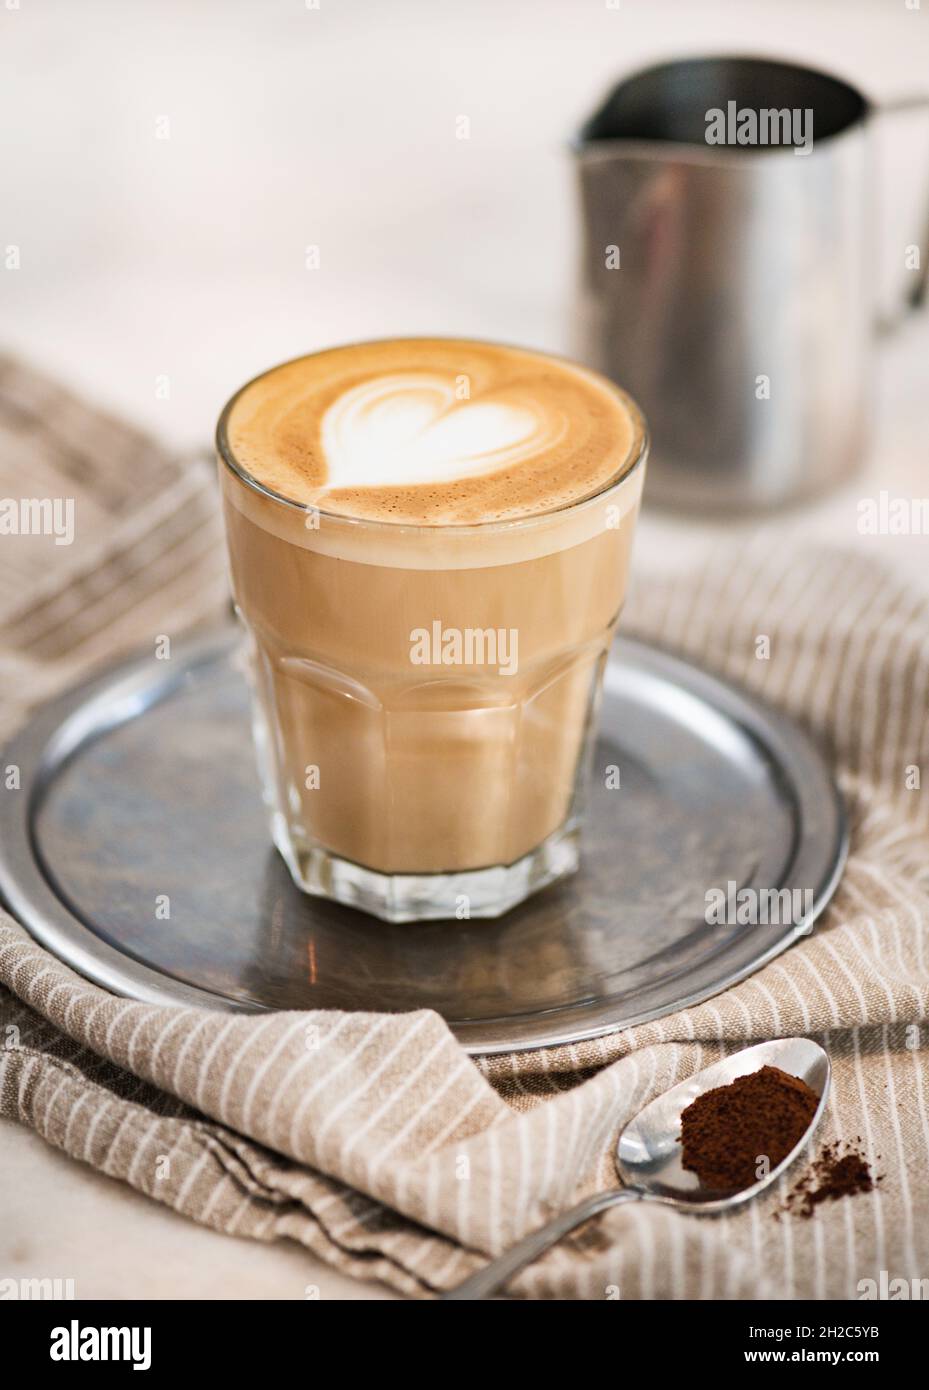 Flat white coffee with heart shaped foam milk on tray Stock Photo